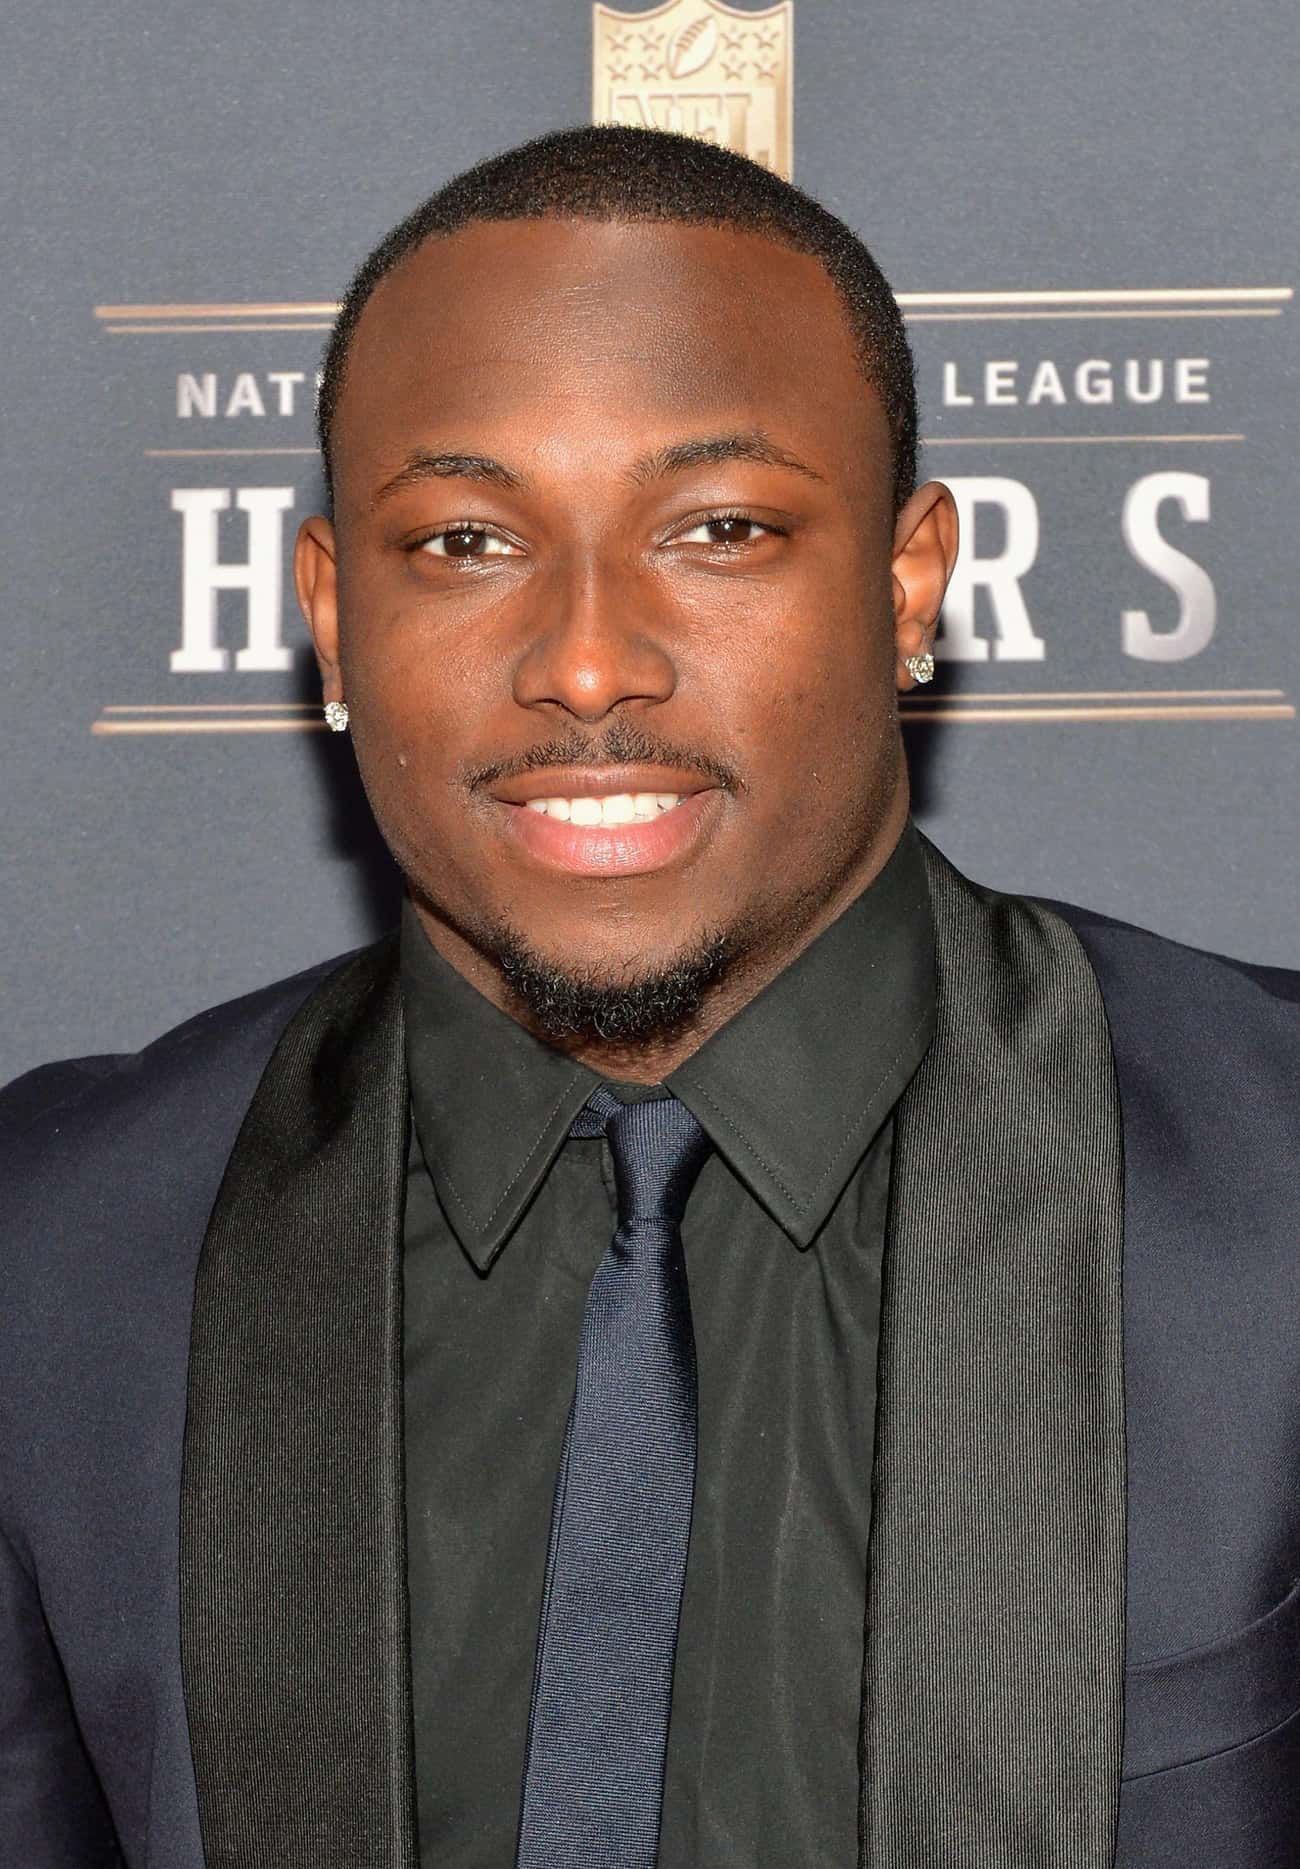 That Time LeSean McCoy Went Off on His Baby Mama